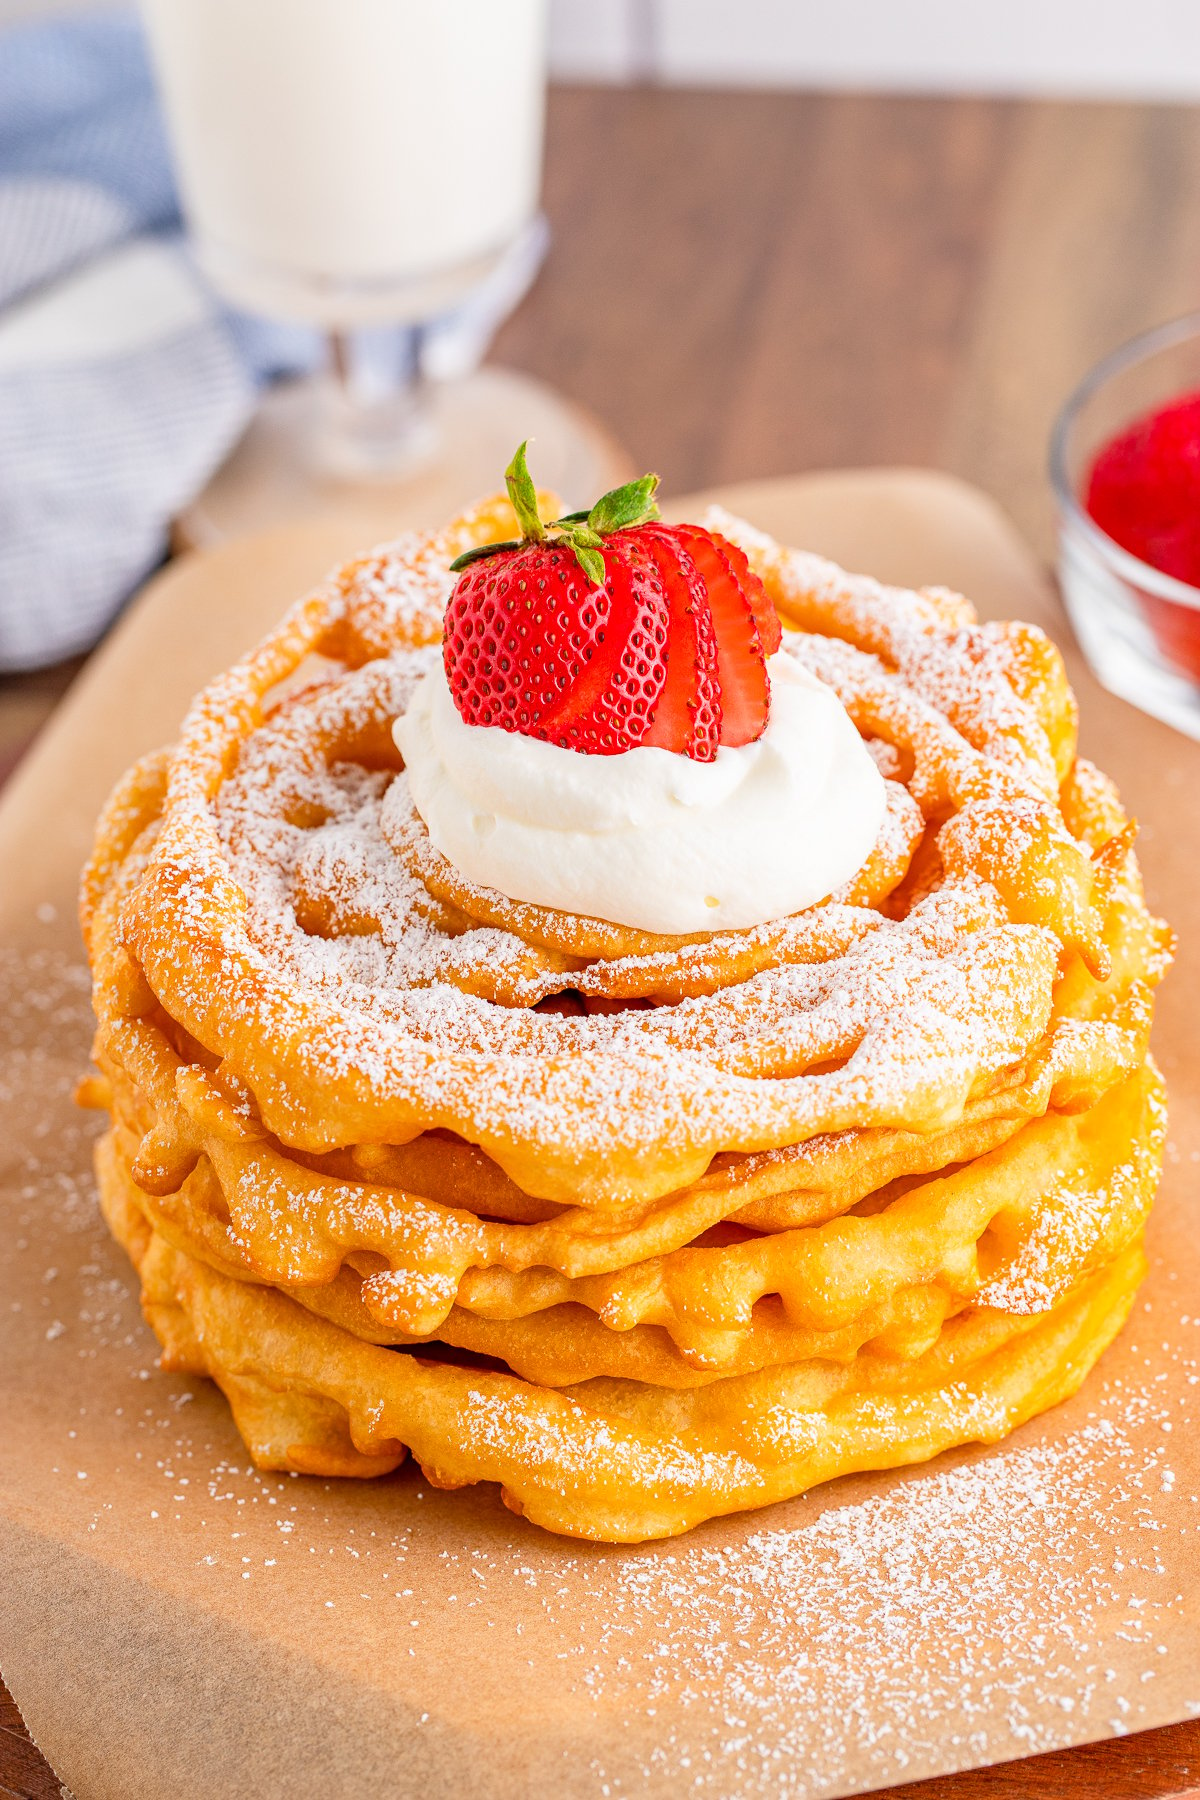 Slightly overhead view of stacked Funnel Cakes with garnishes.